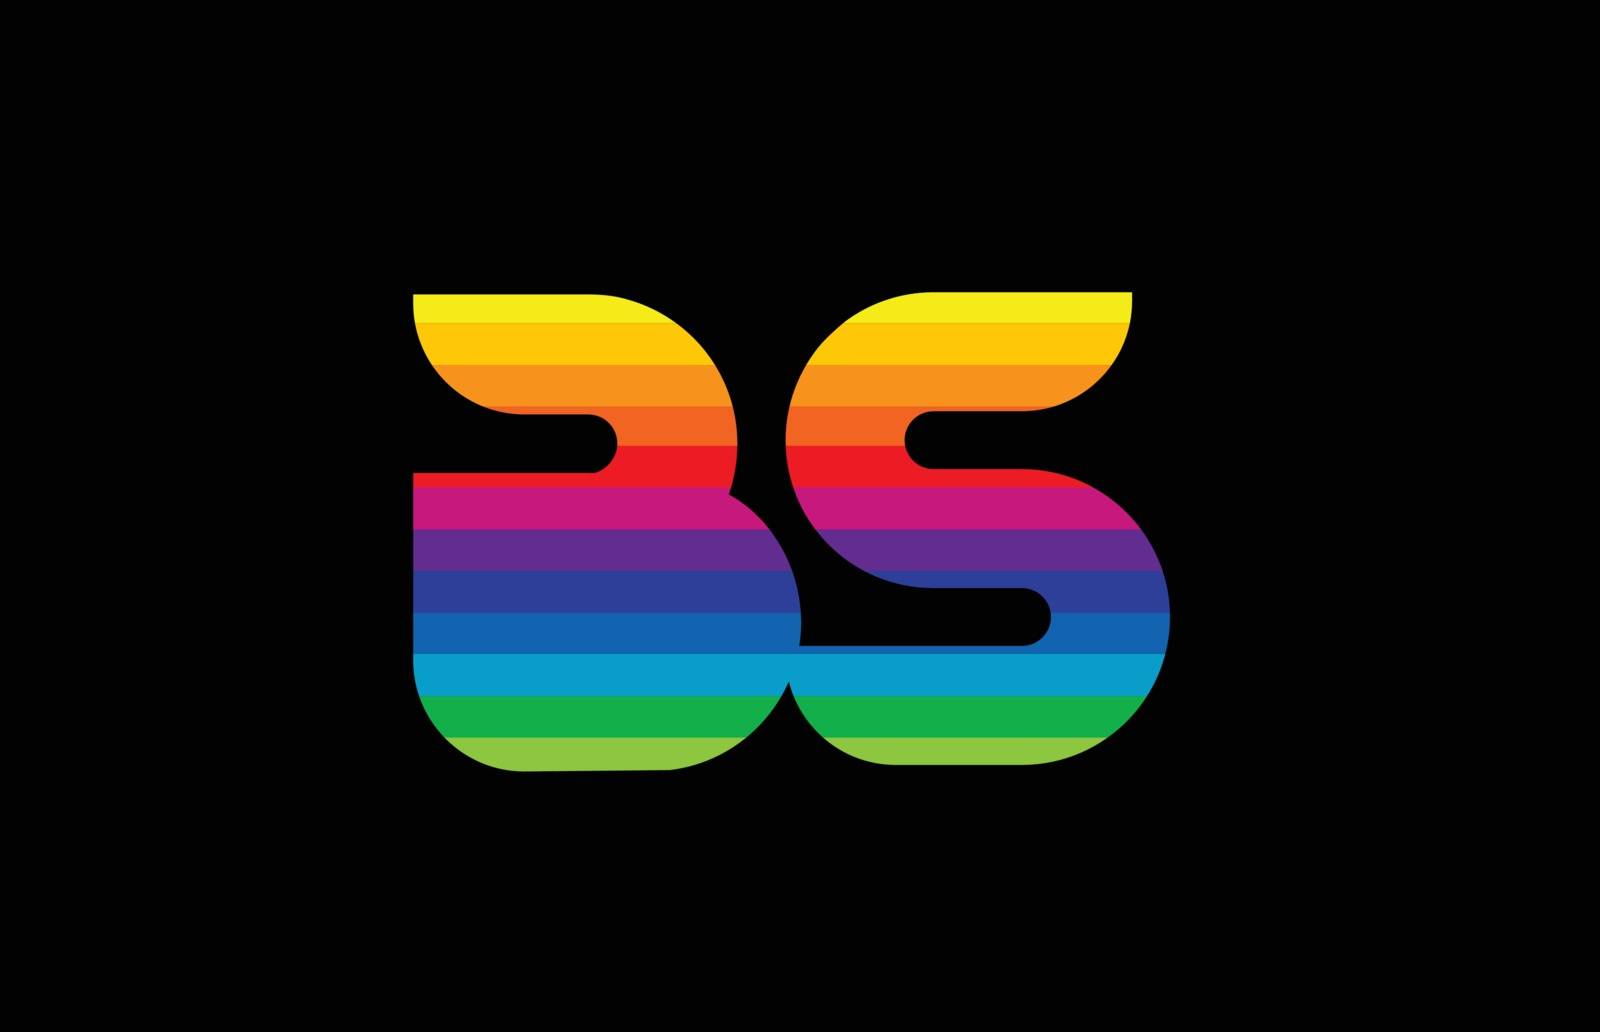 rainbow color colored colorful alphabet letter bs b s logo combination design suitable for a company or business